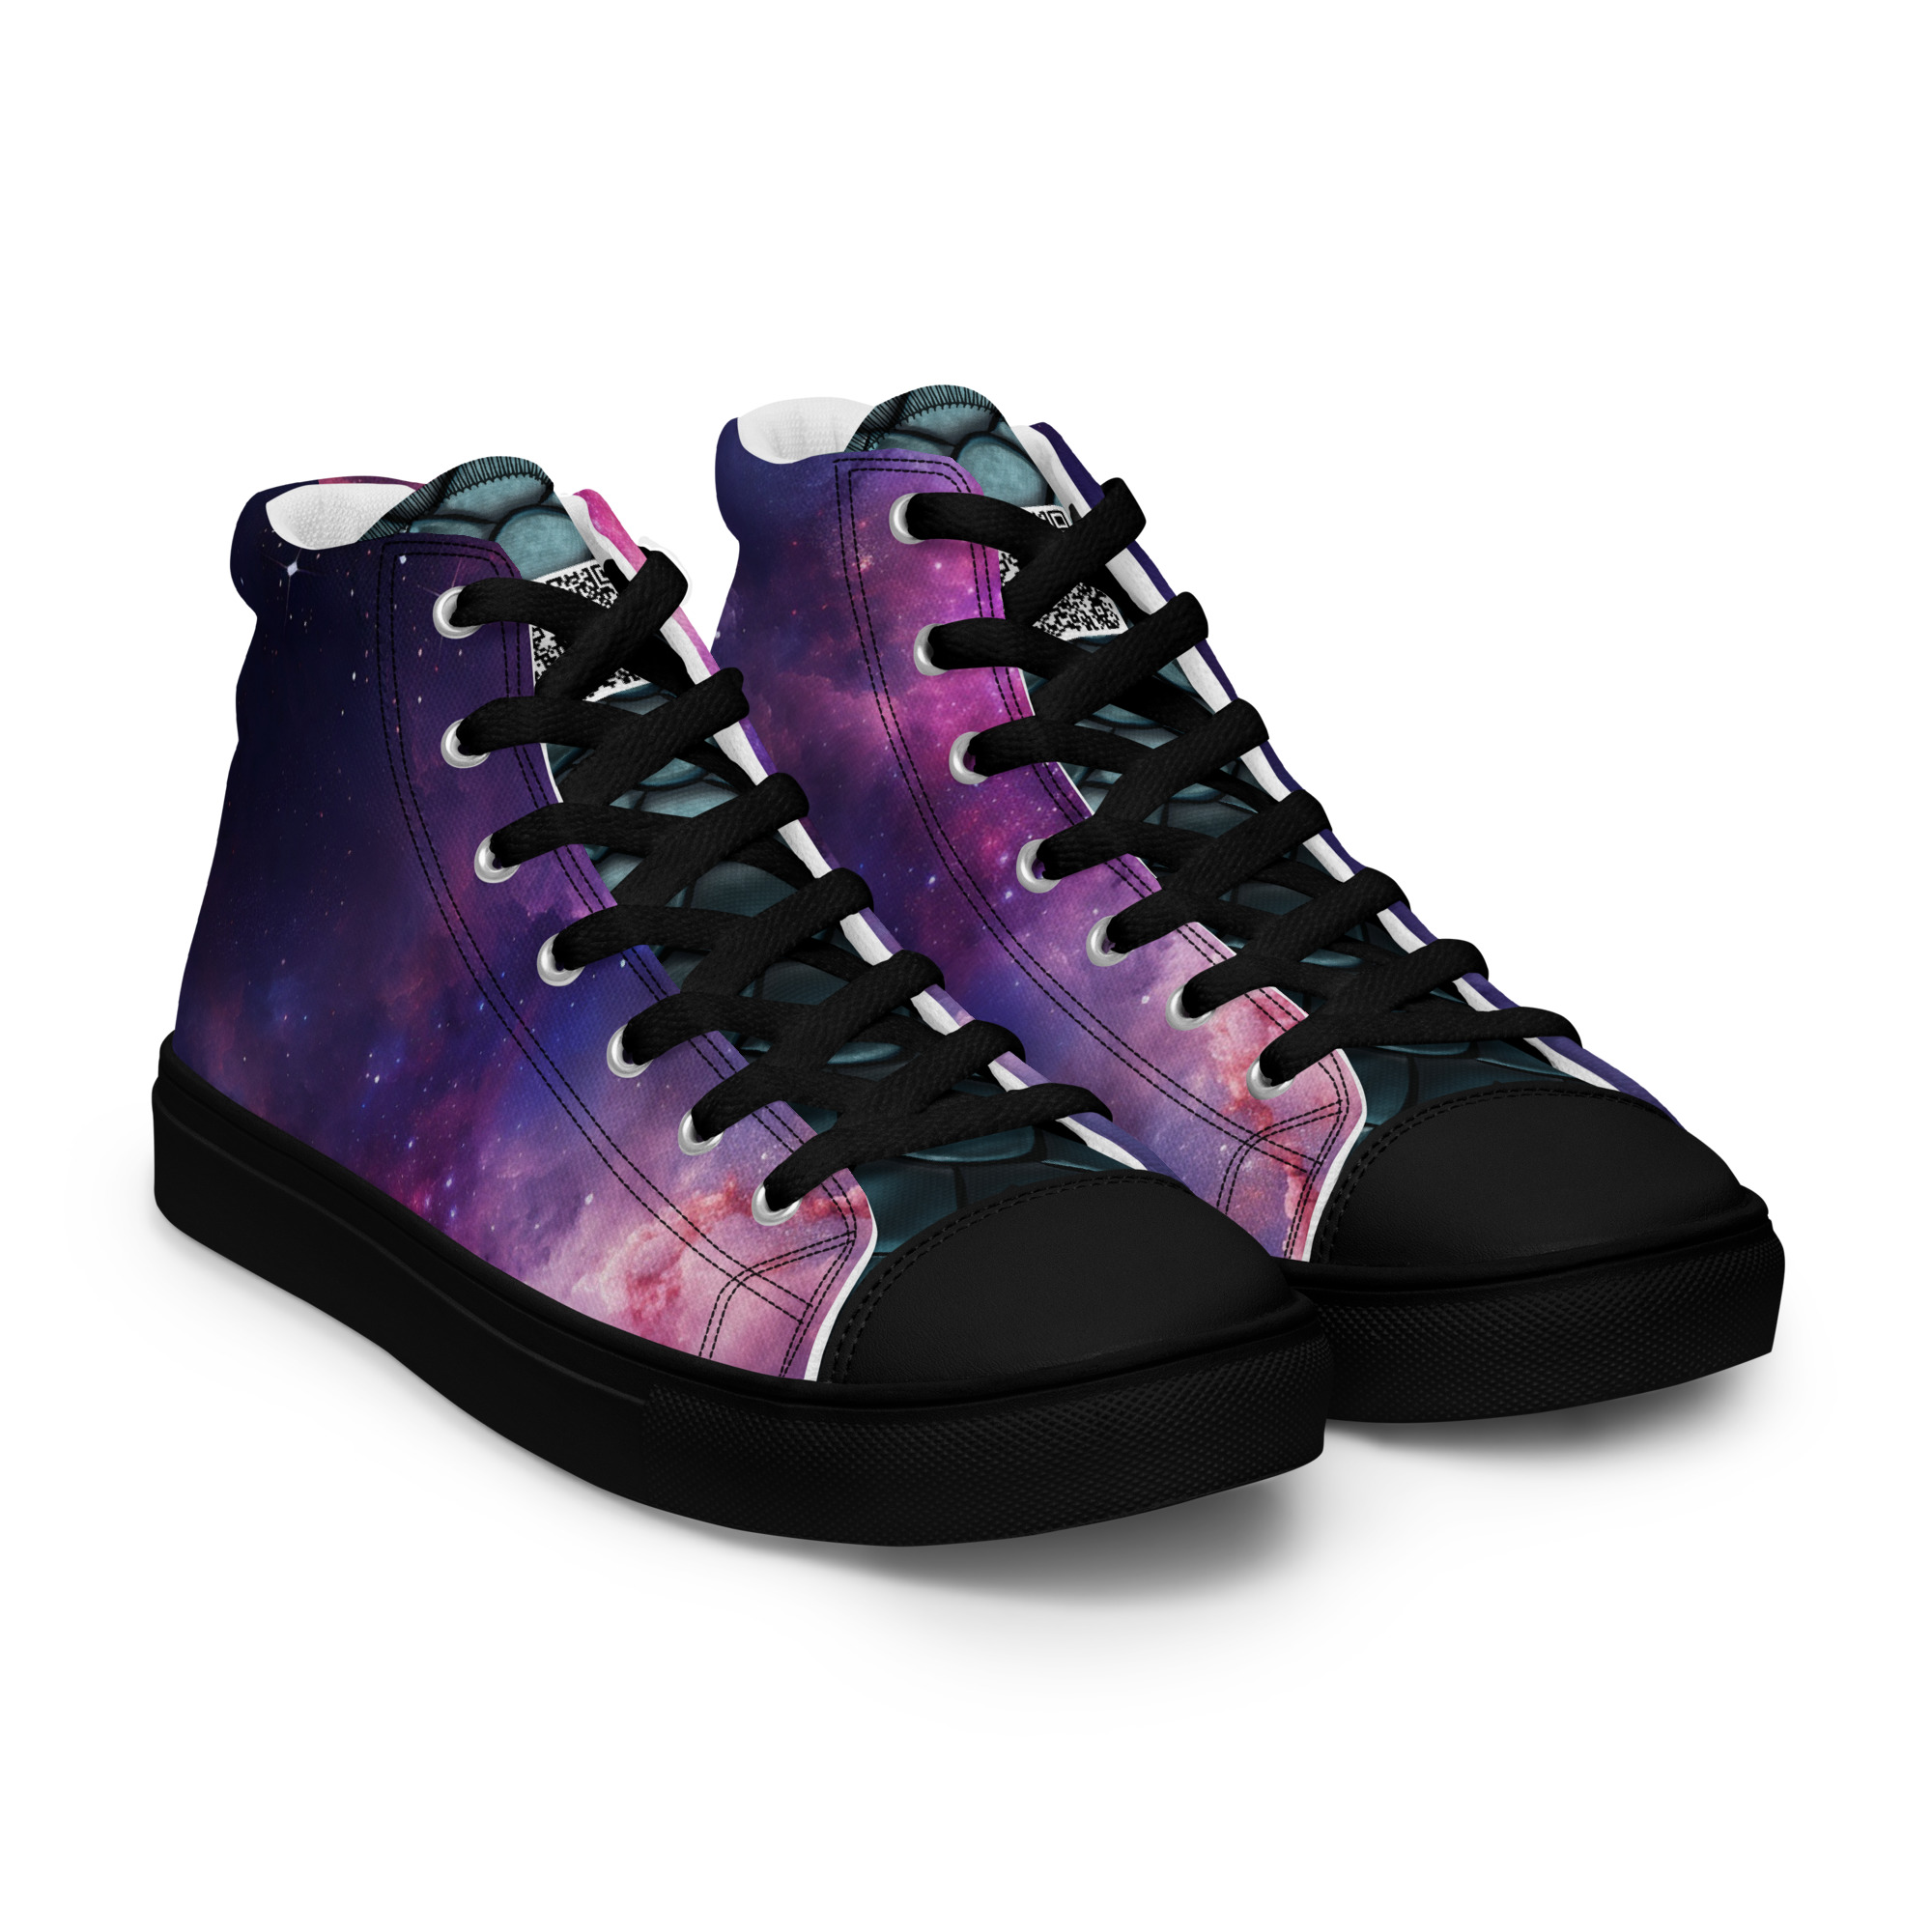 mens-high-top-canvas-shoes-black-right-front-6561b6887af70.jpg